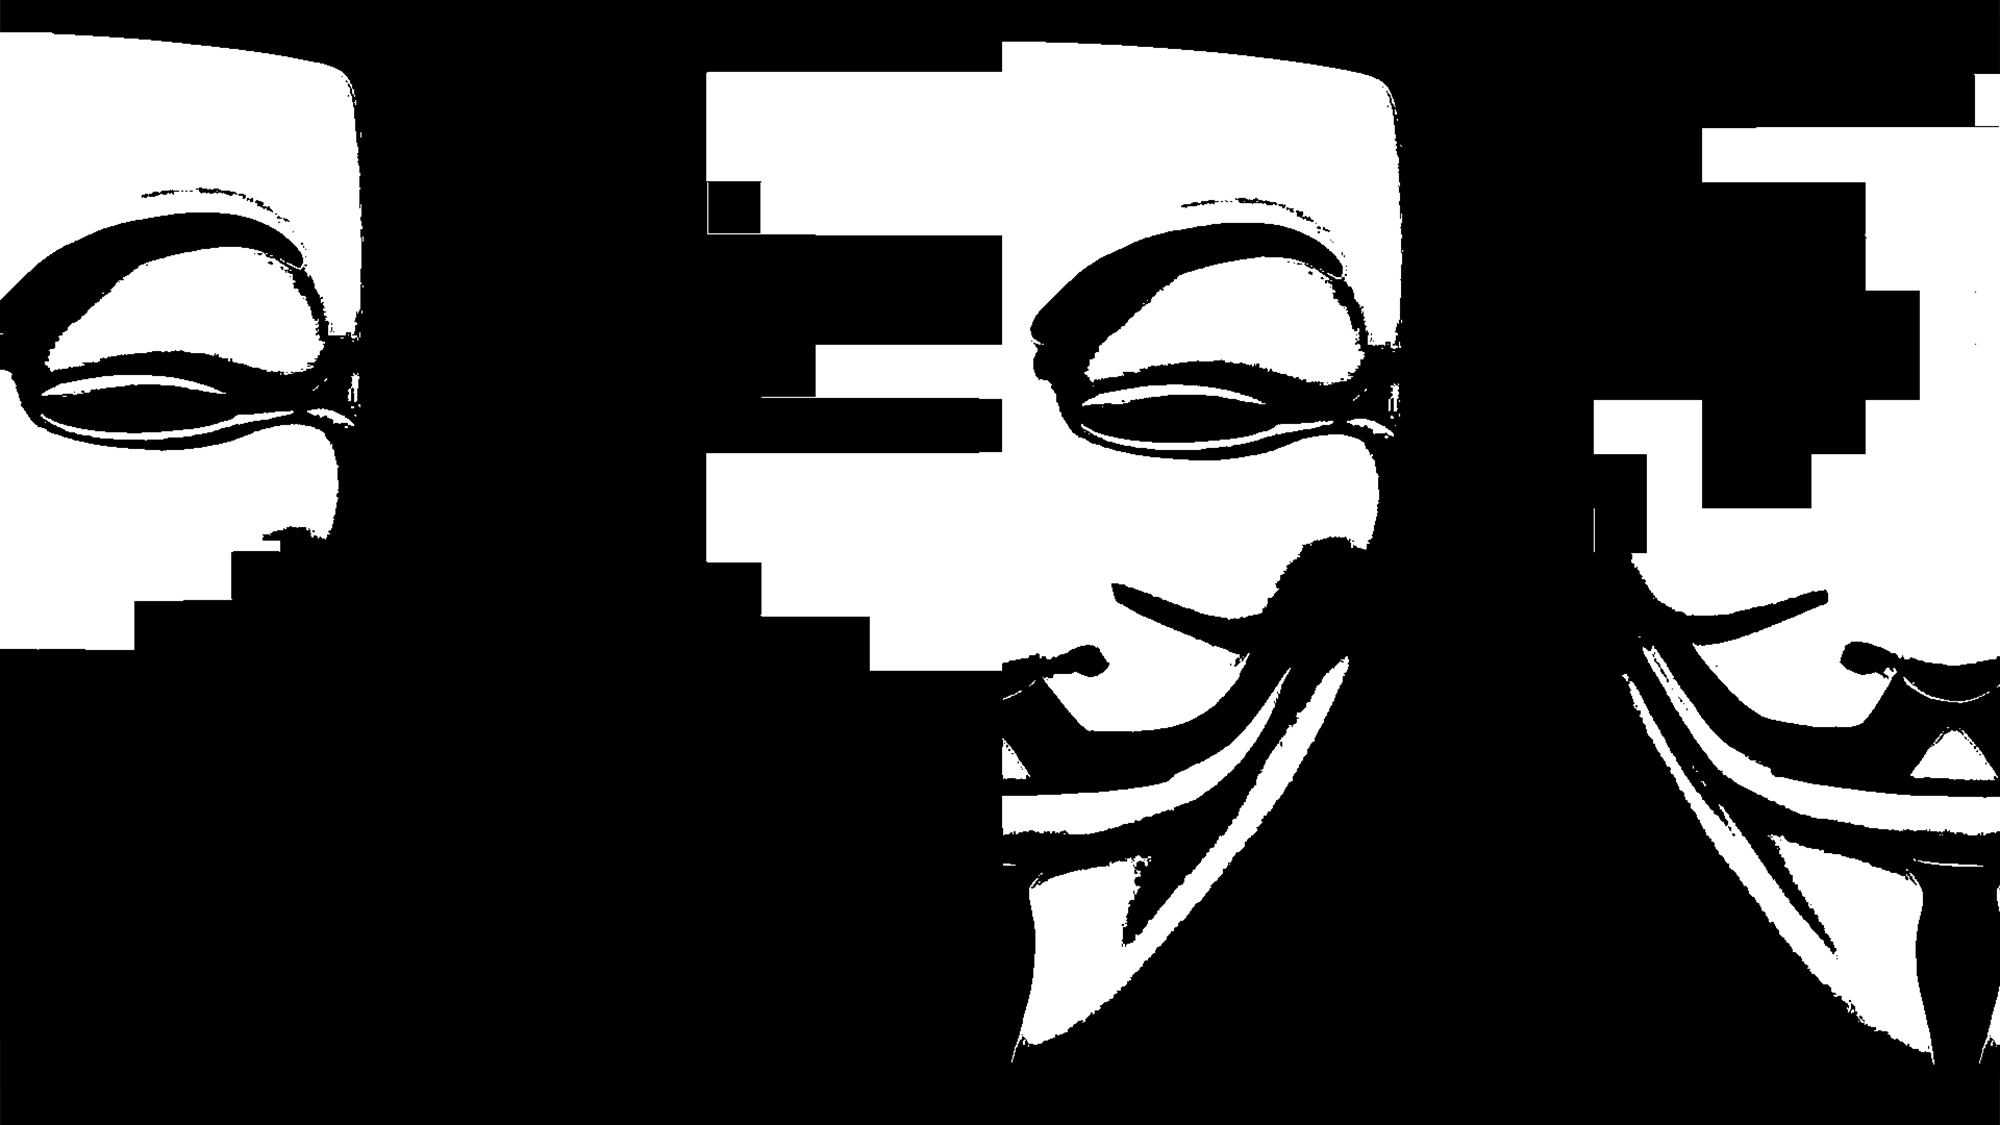 The Hacker Group Anonymous Returns The Atlantic - roblox bully story nazi symbol